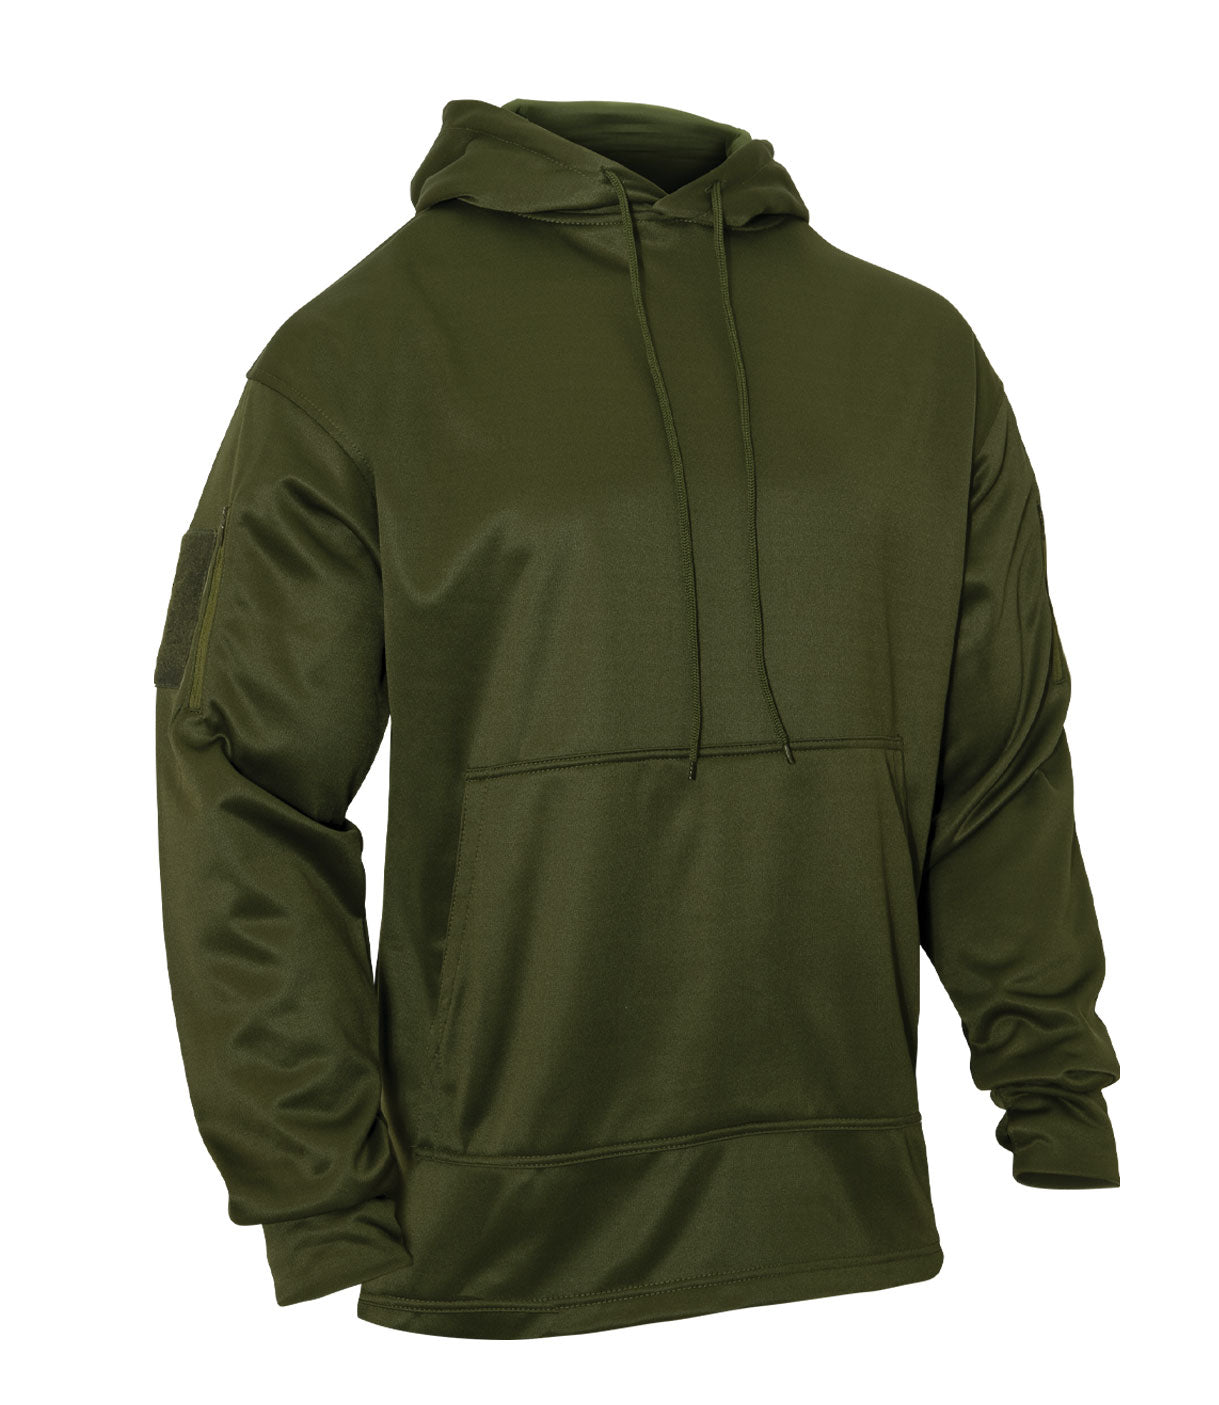 Milspec Concealed Carry Hoodie Concealed Carry Clothing MilTac Tactical Military Outdoor Gear Australia